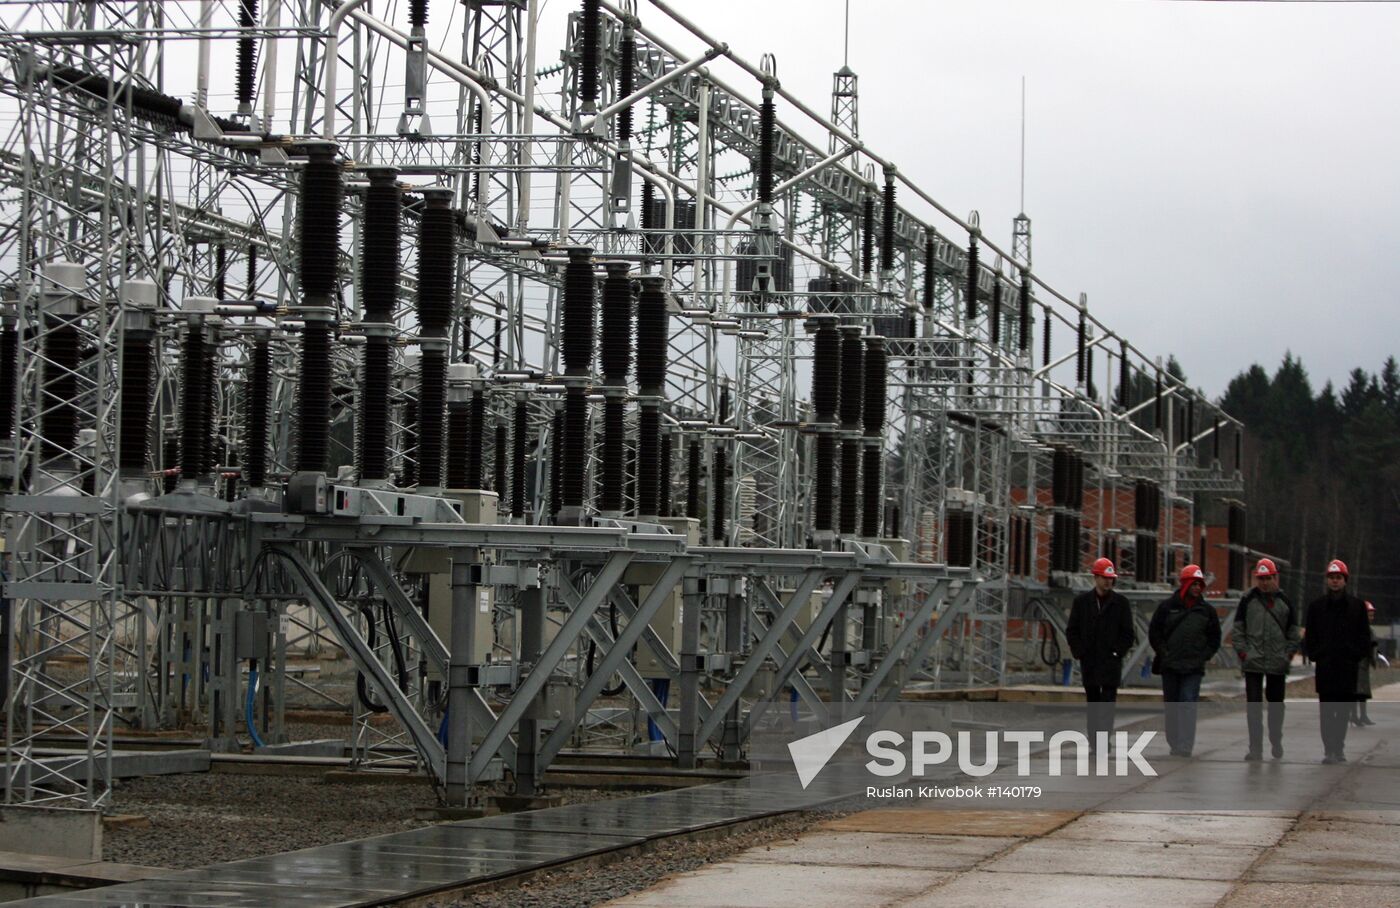 BELY RAST ELECTRIC SUBSTATION RE-COMMISSIONING